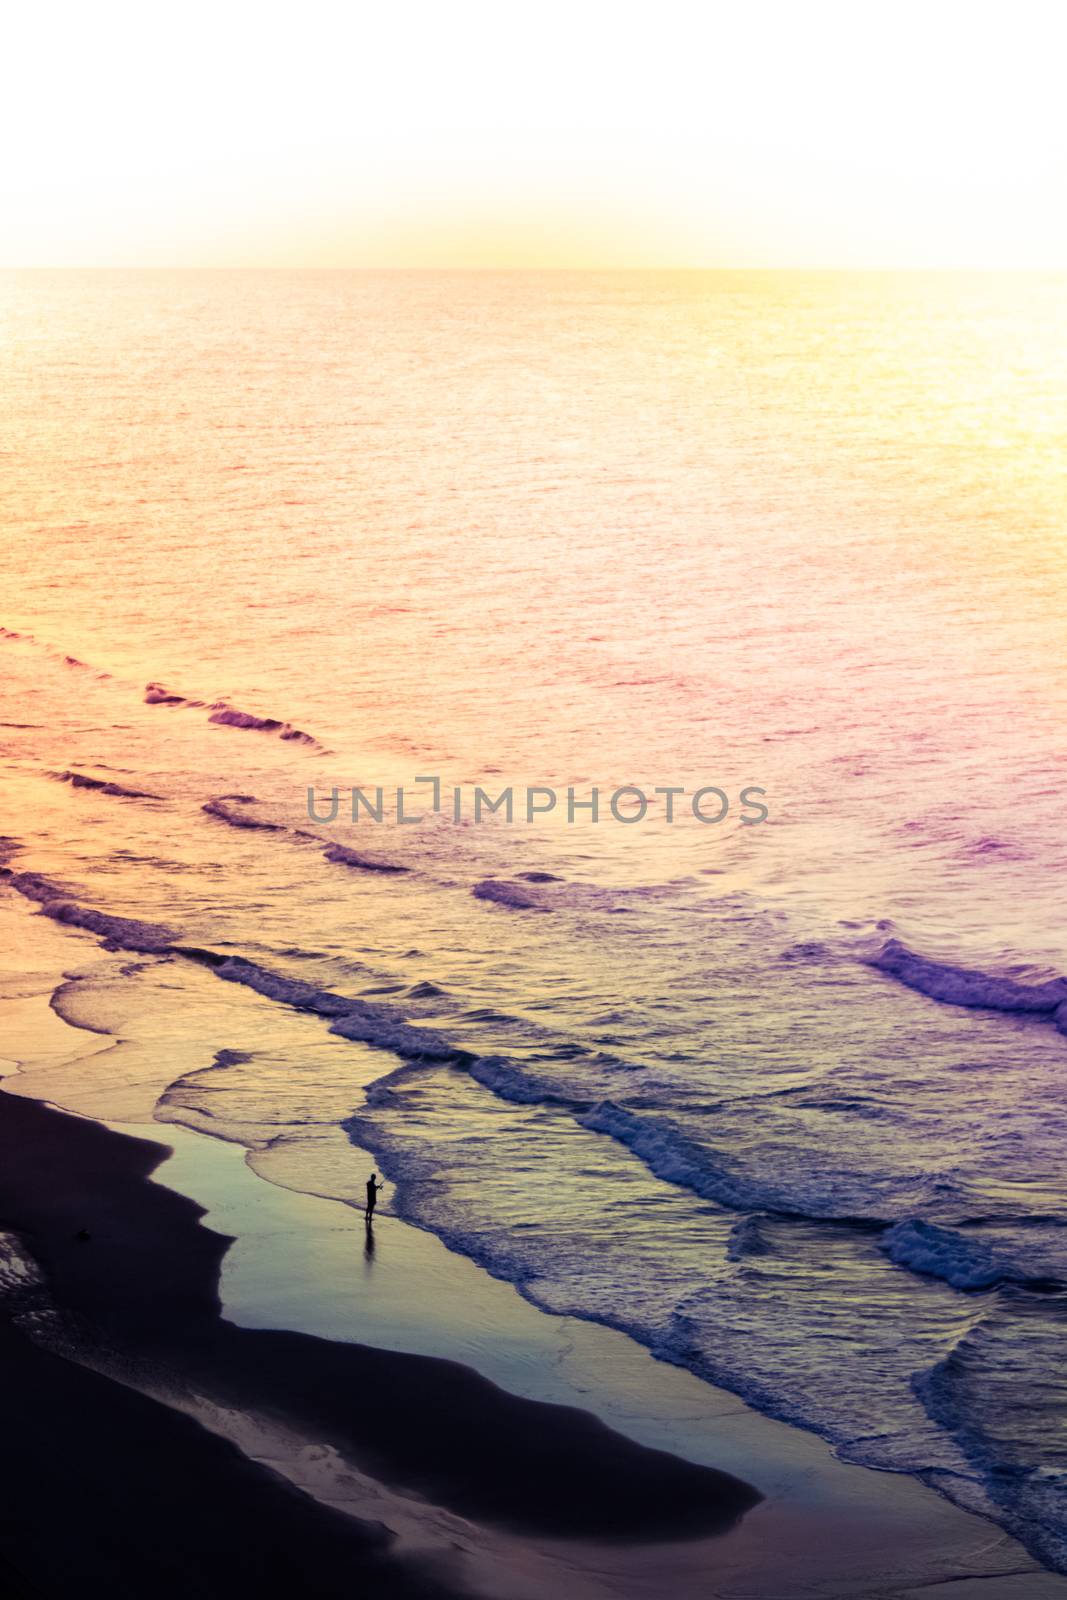 A colorful sunrise on the shoreline of a beach with a surf fisherman.